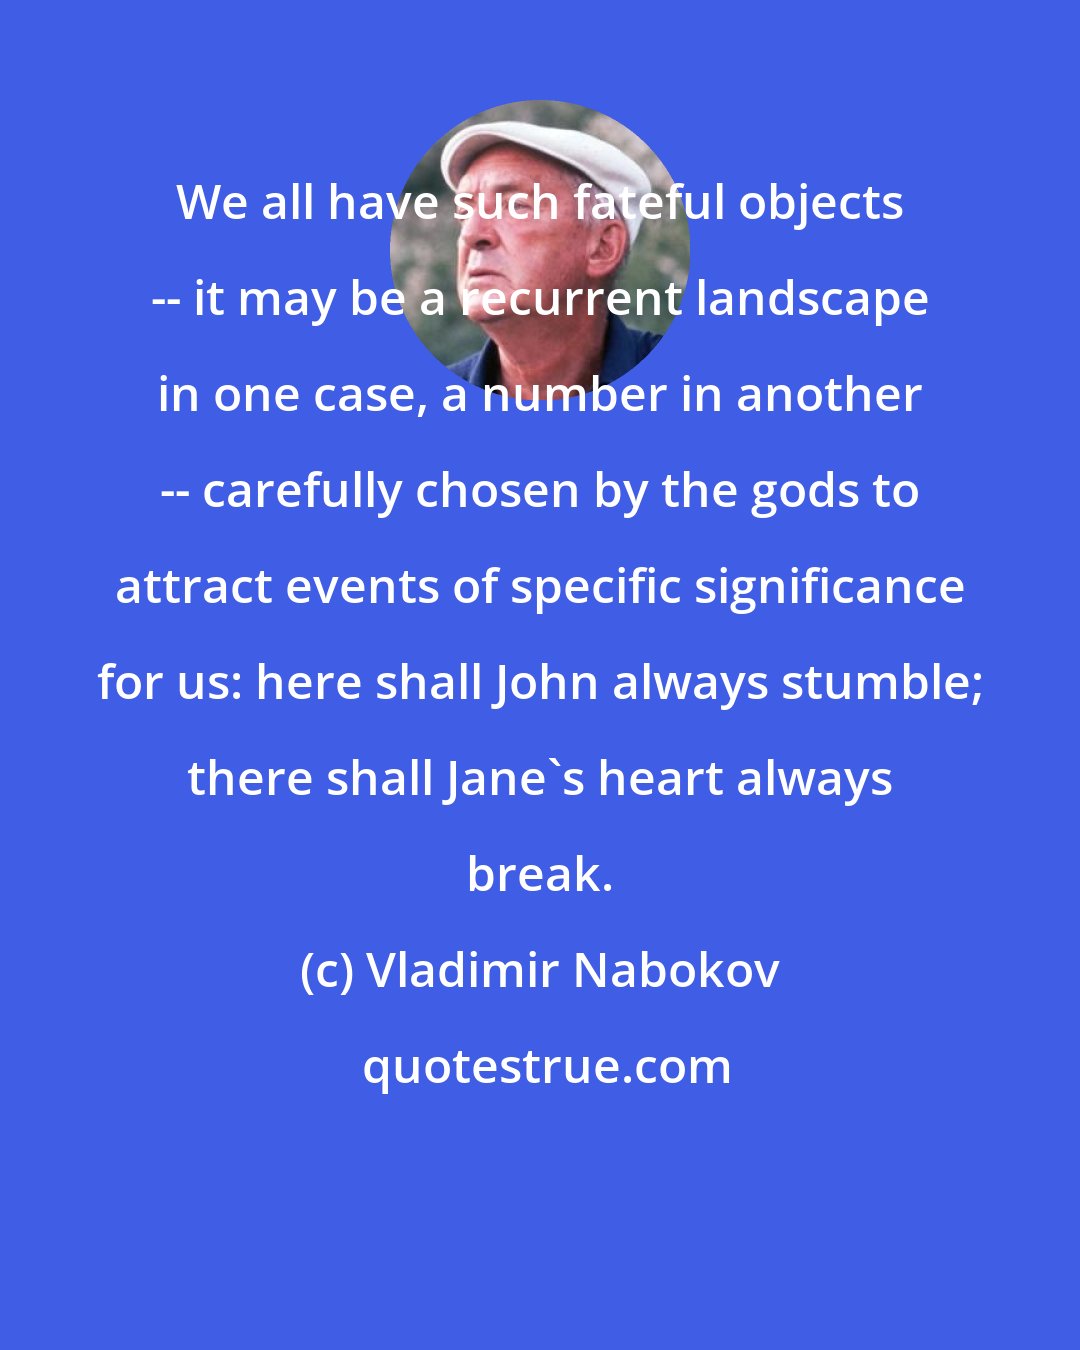 Vladimir Nabokov: We all have such fateful objects -- it may be a recurrent landscape in one case, a number in another -- carefully chosen by the gods to attract events of specific significance for us: here shall John always stumble; there shall Jane's heart always break.